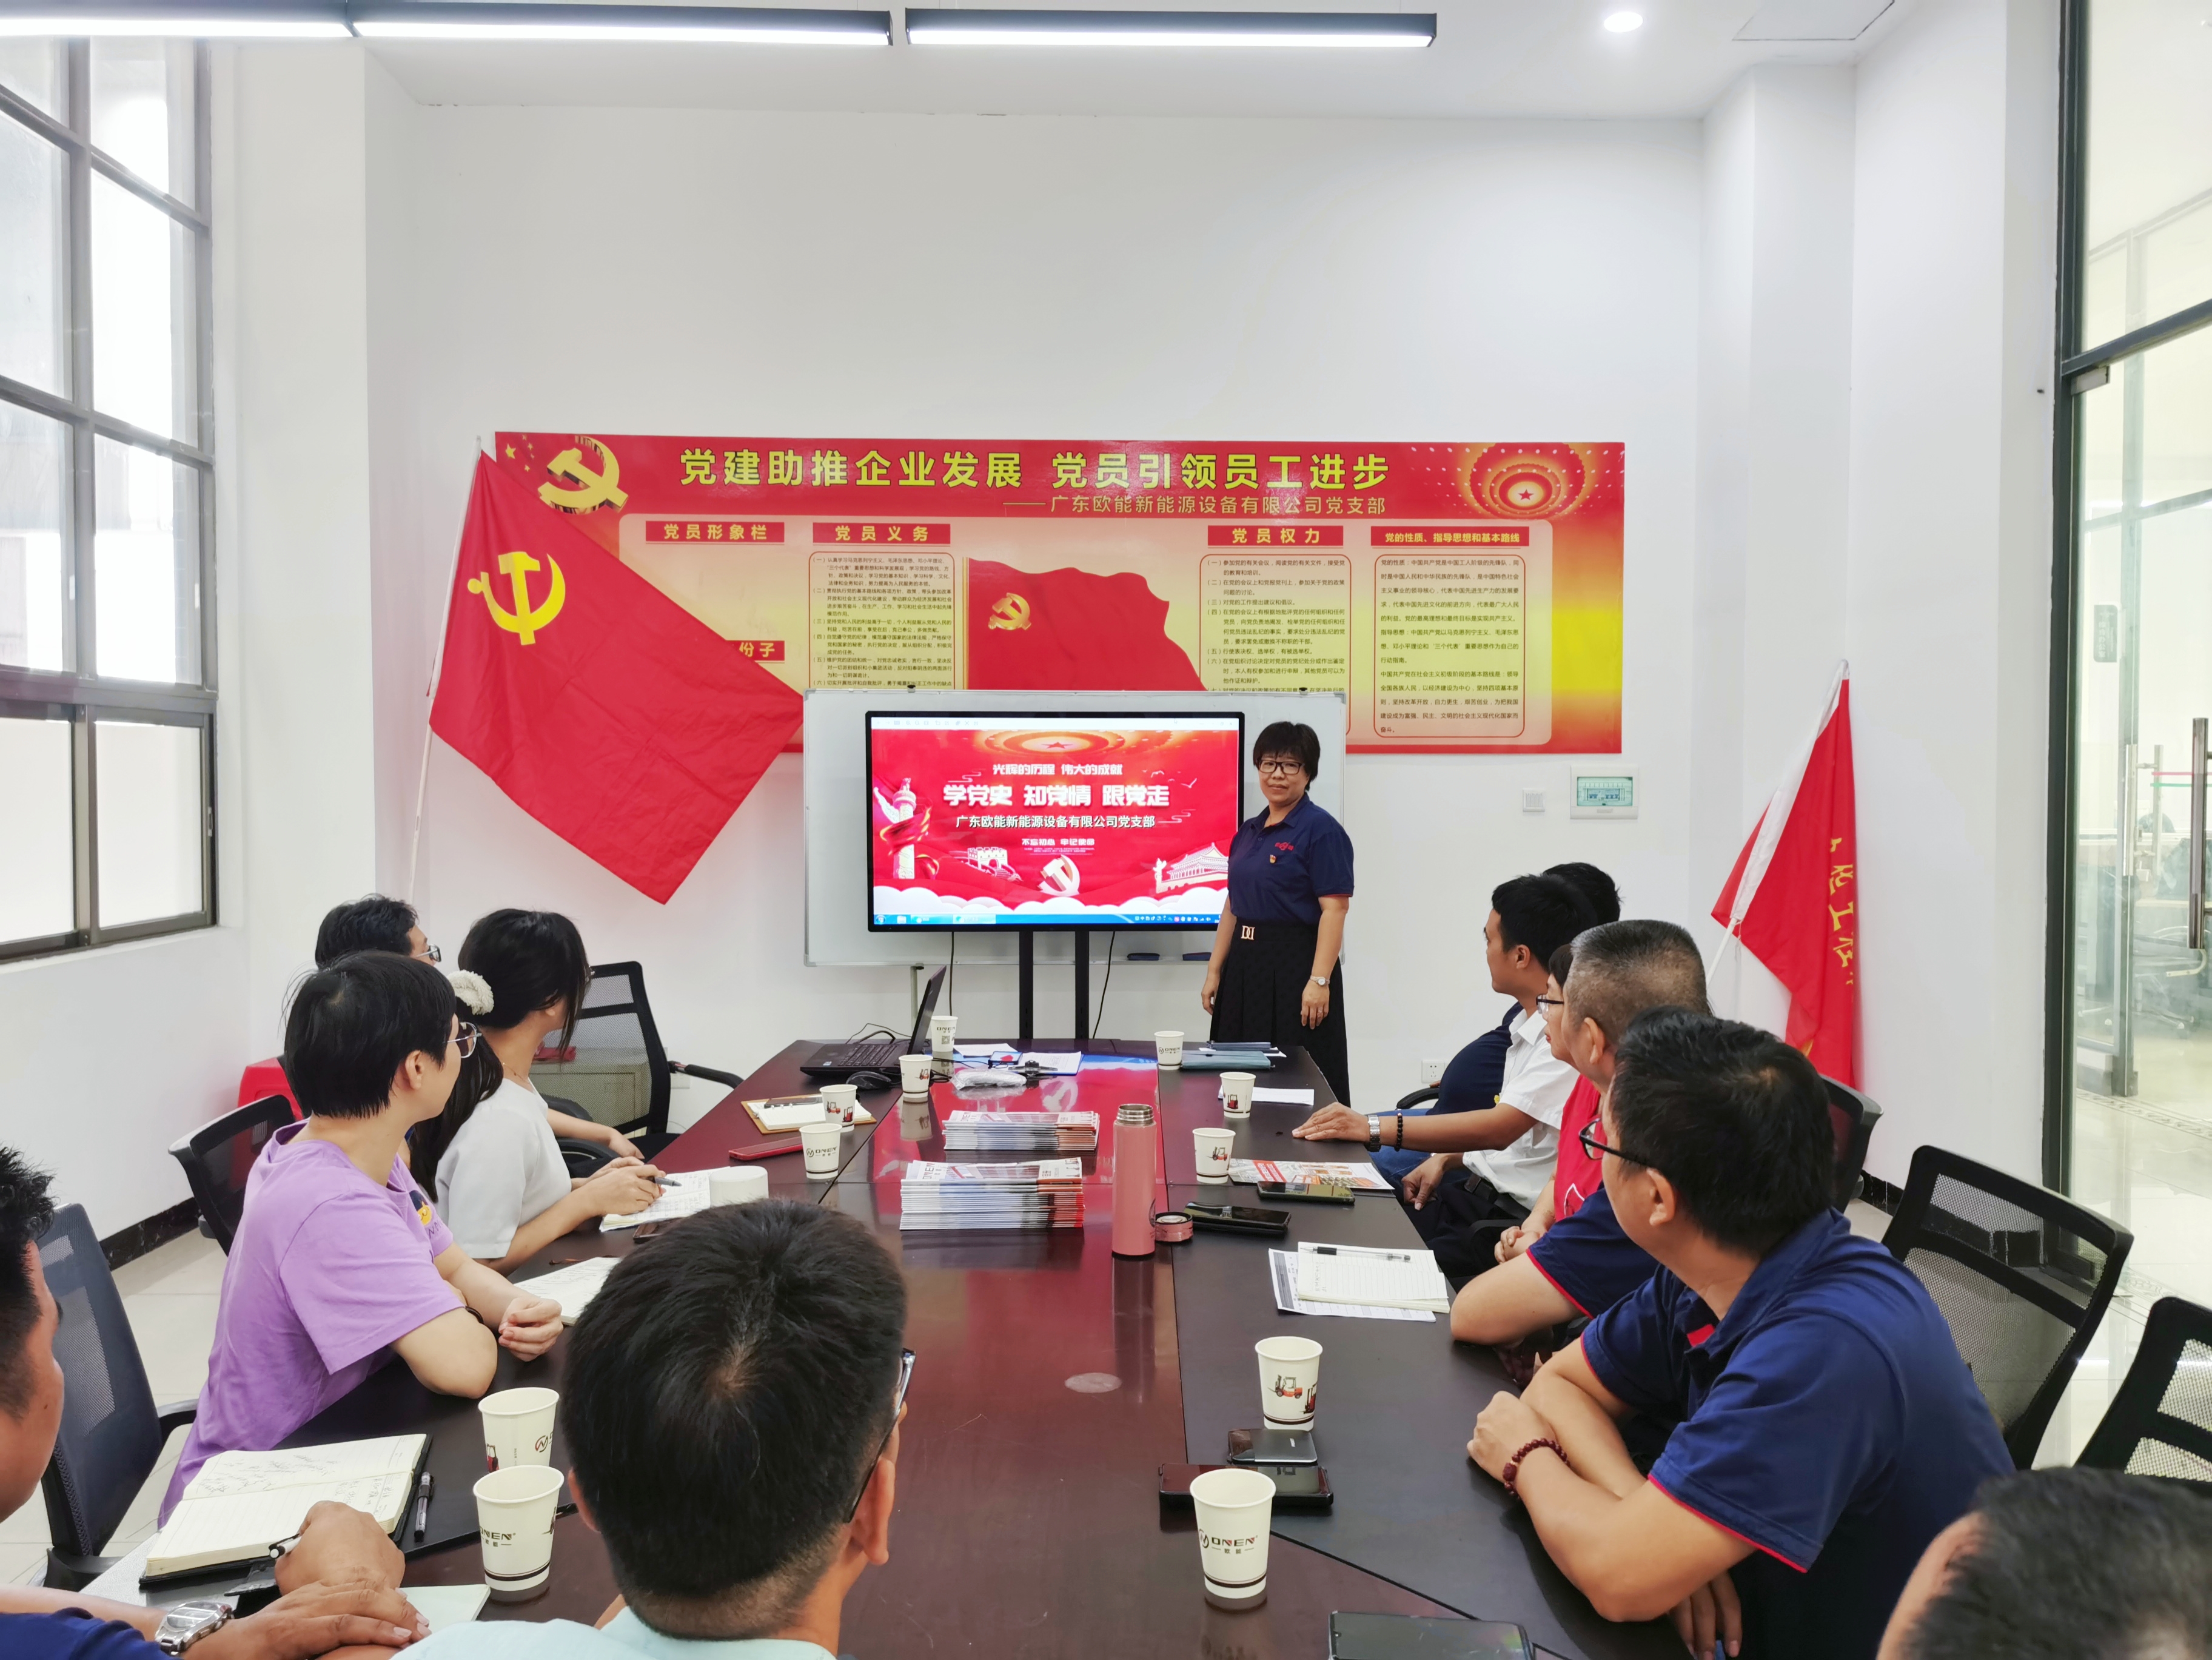 The party branch of Guangdong ONEN New-Resource Equipment Co., Ltd. launched the theme activity of the 102nd anniversary of the founding of the CPC